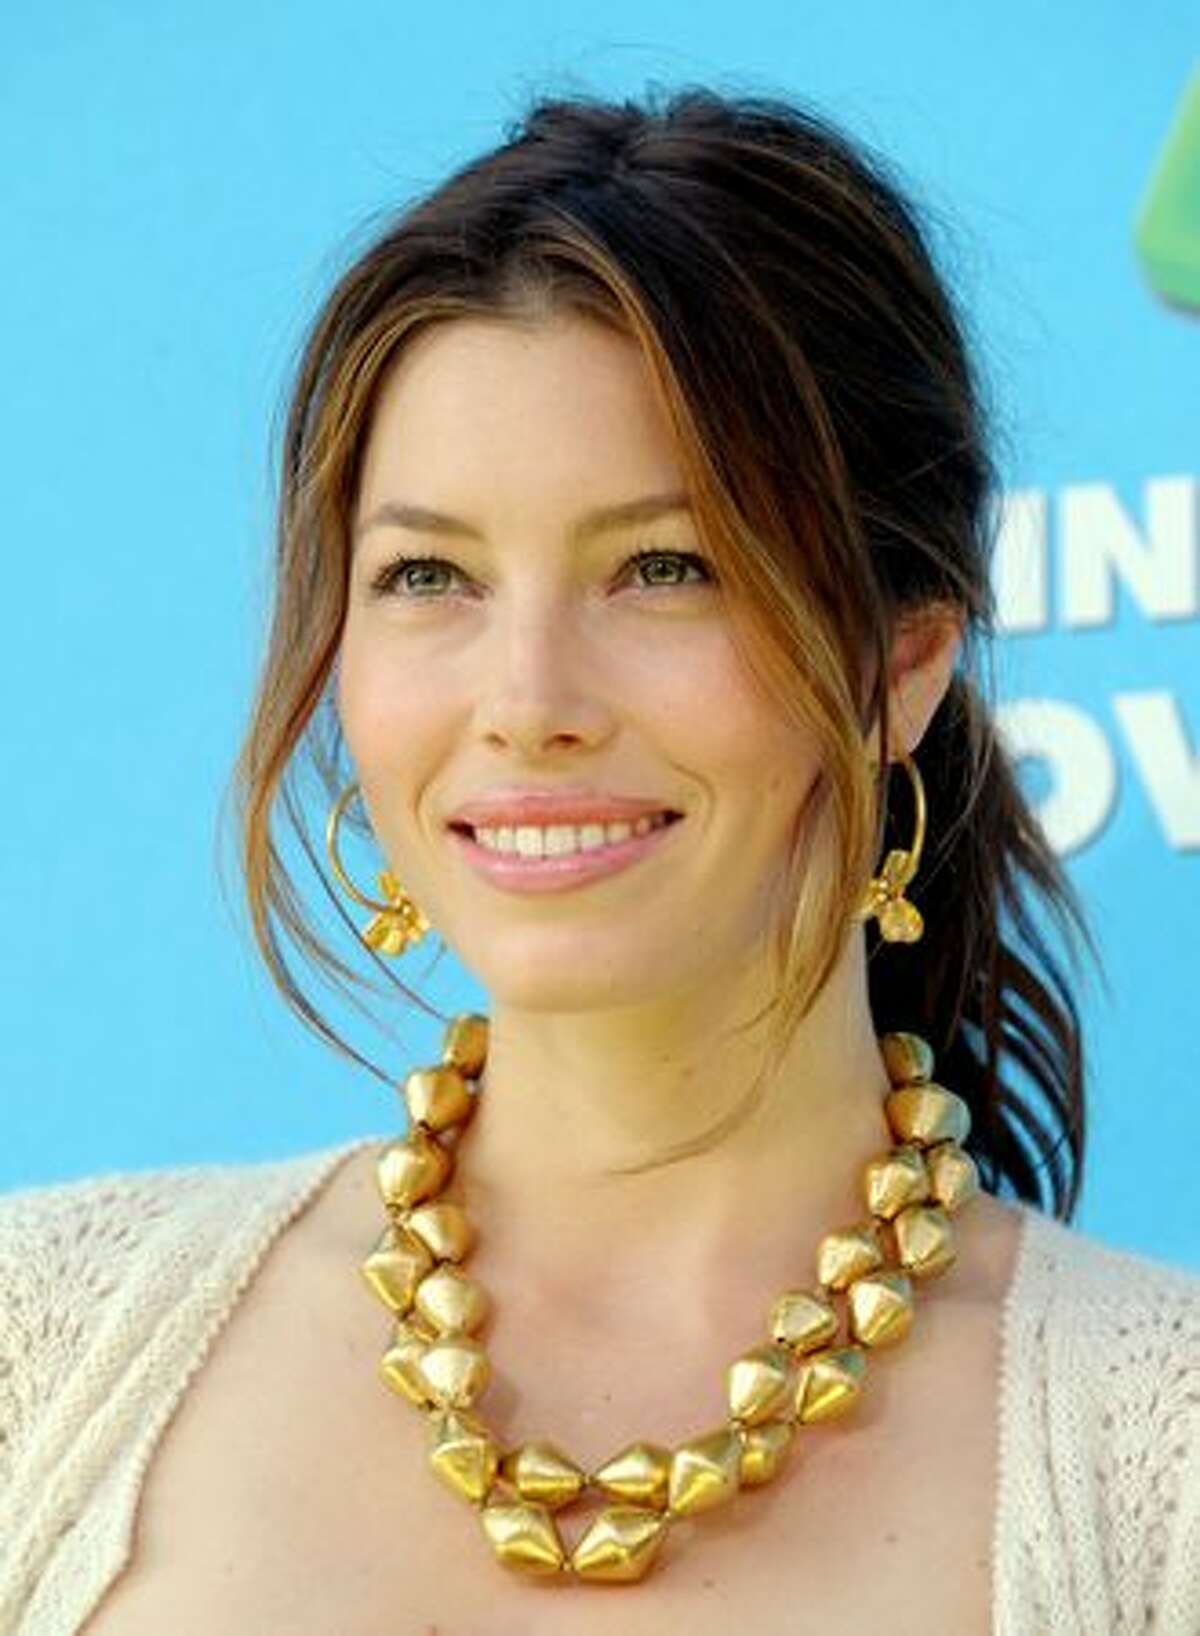 Actress Jessica Biel arrives at the premiere of Sony Pictures' "Planet 51" at the Village Theater in Los Angeles, California.